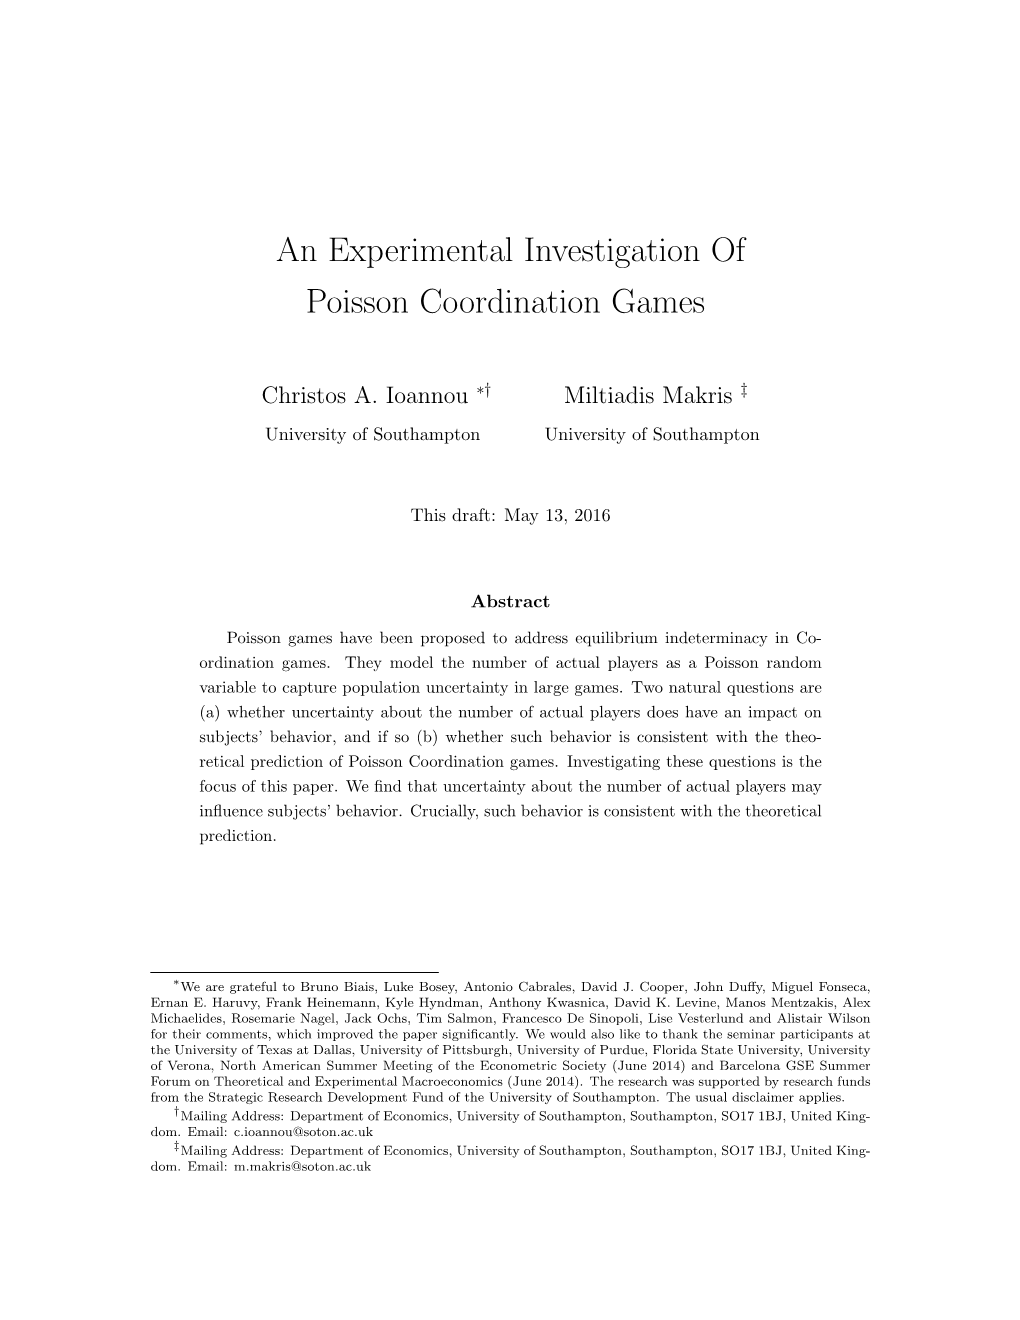 An Experimental Investigation of Poisson Coordination Games